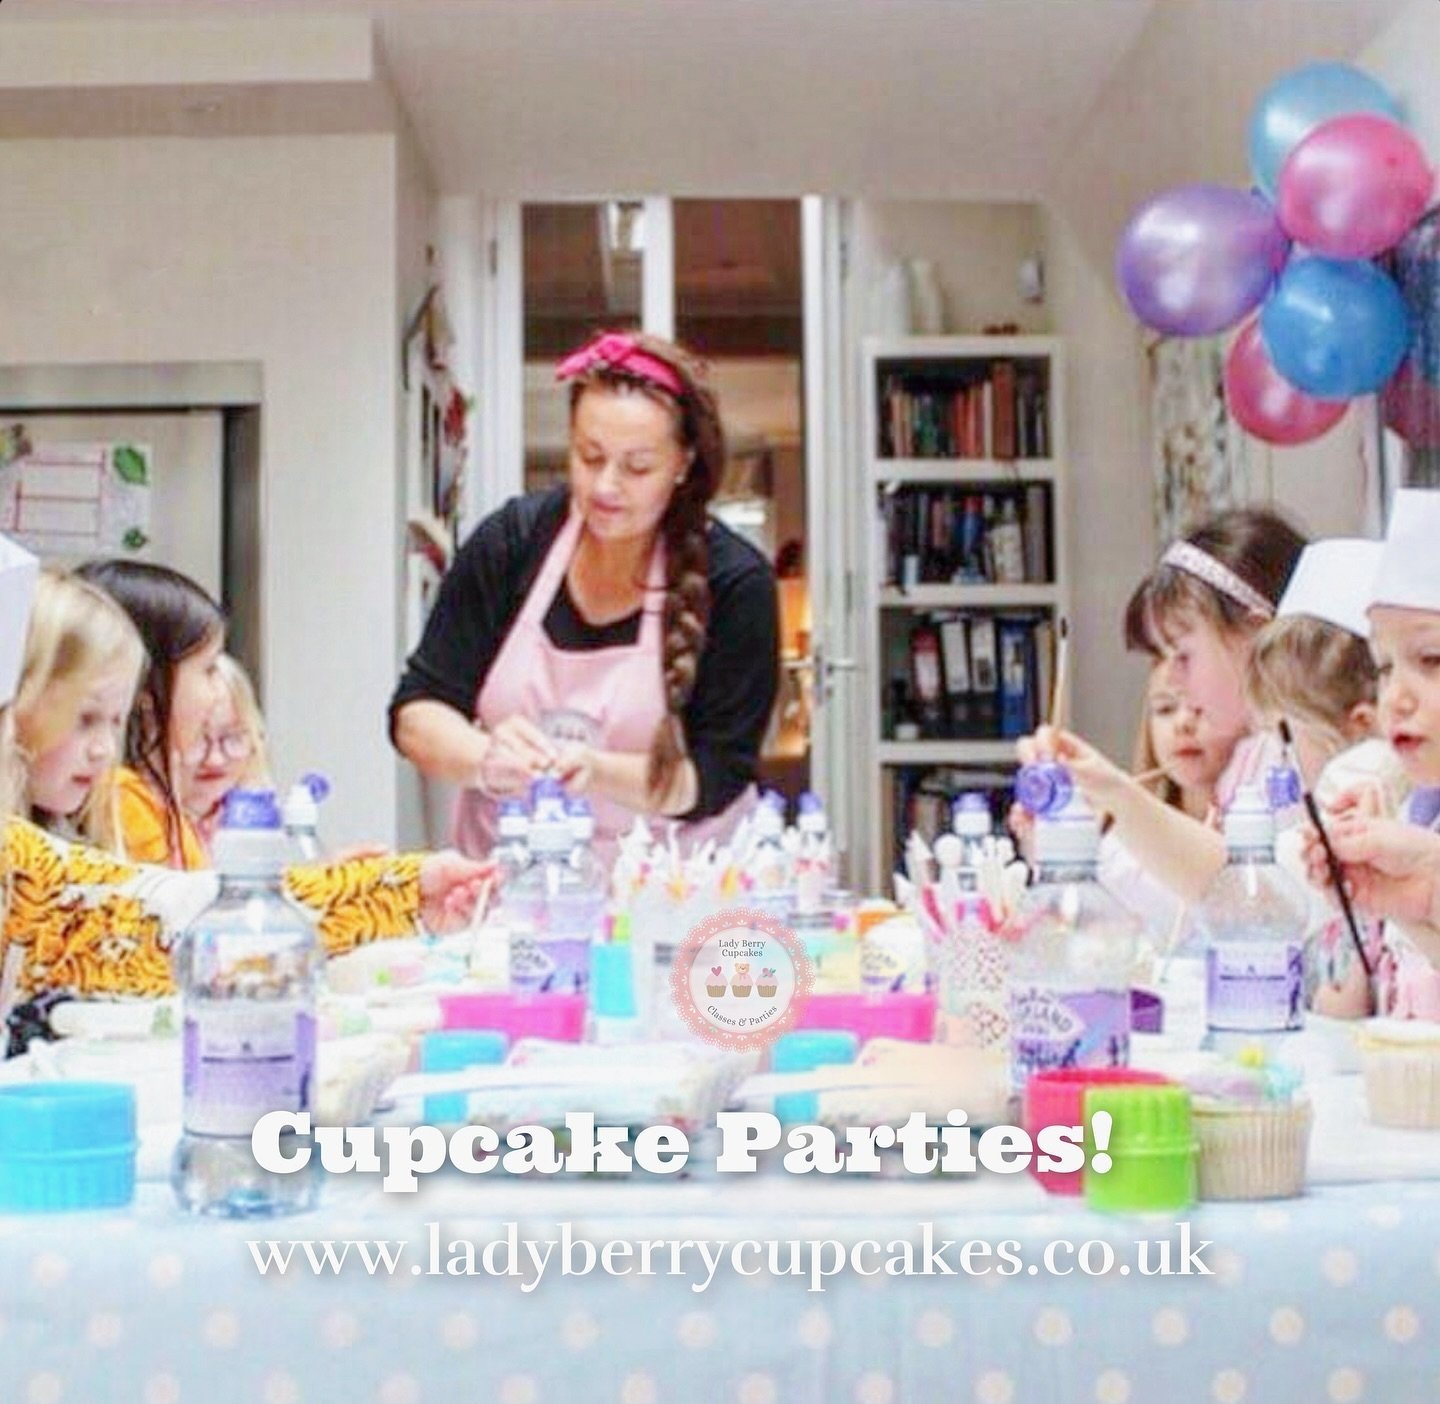 🎈 Book them a Lady Berry Cupcake decorating party! 
So much fun for all ages! I take care of everything, so you get to relax and enjoy the party! 

⭐️ Book yours at www.ladyberrycupcakes.co.uk 

#CupcakeParty#CupcakeDecoratingParty#LadyBerryCupcakeP